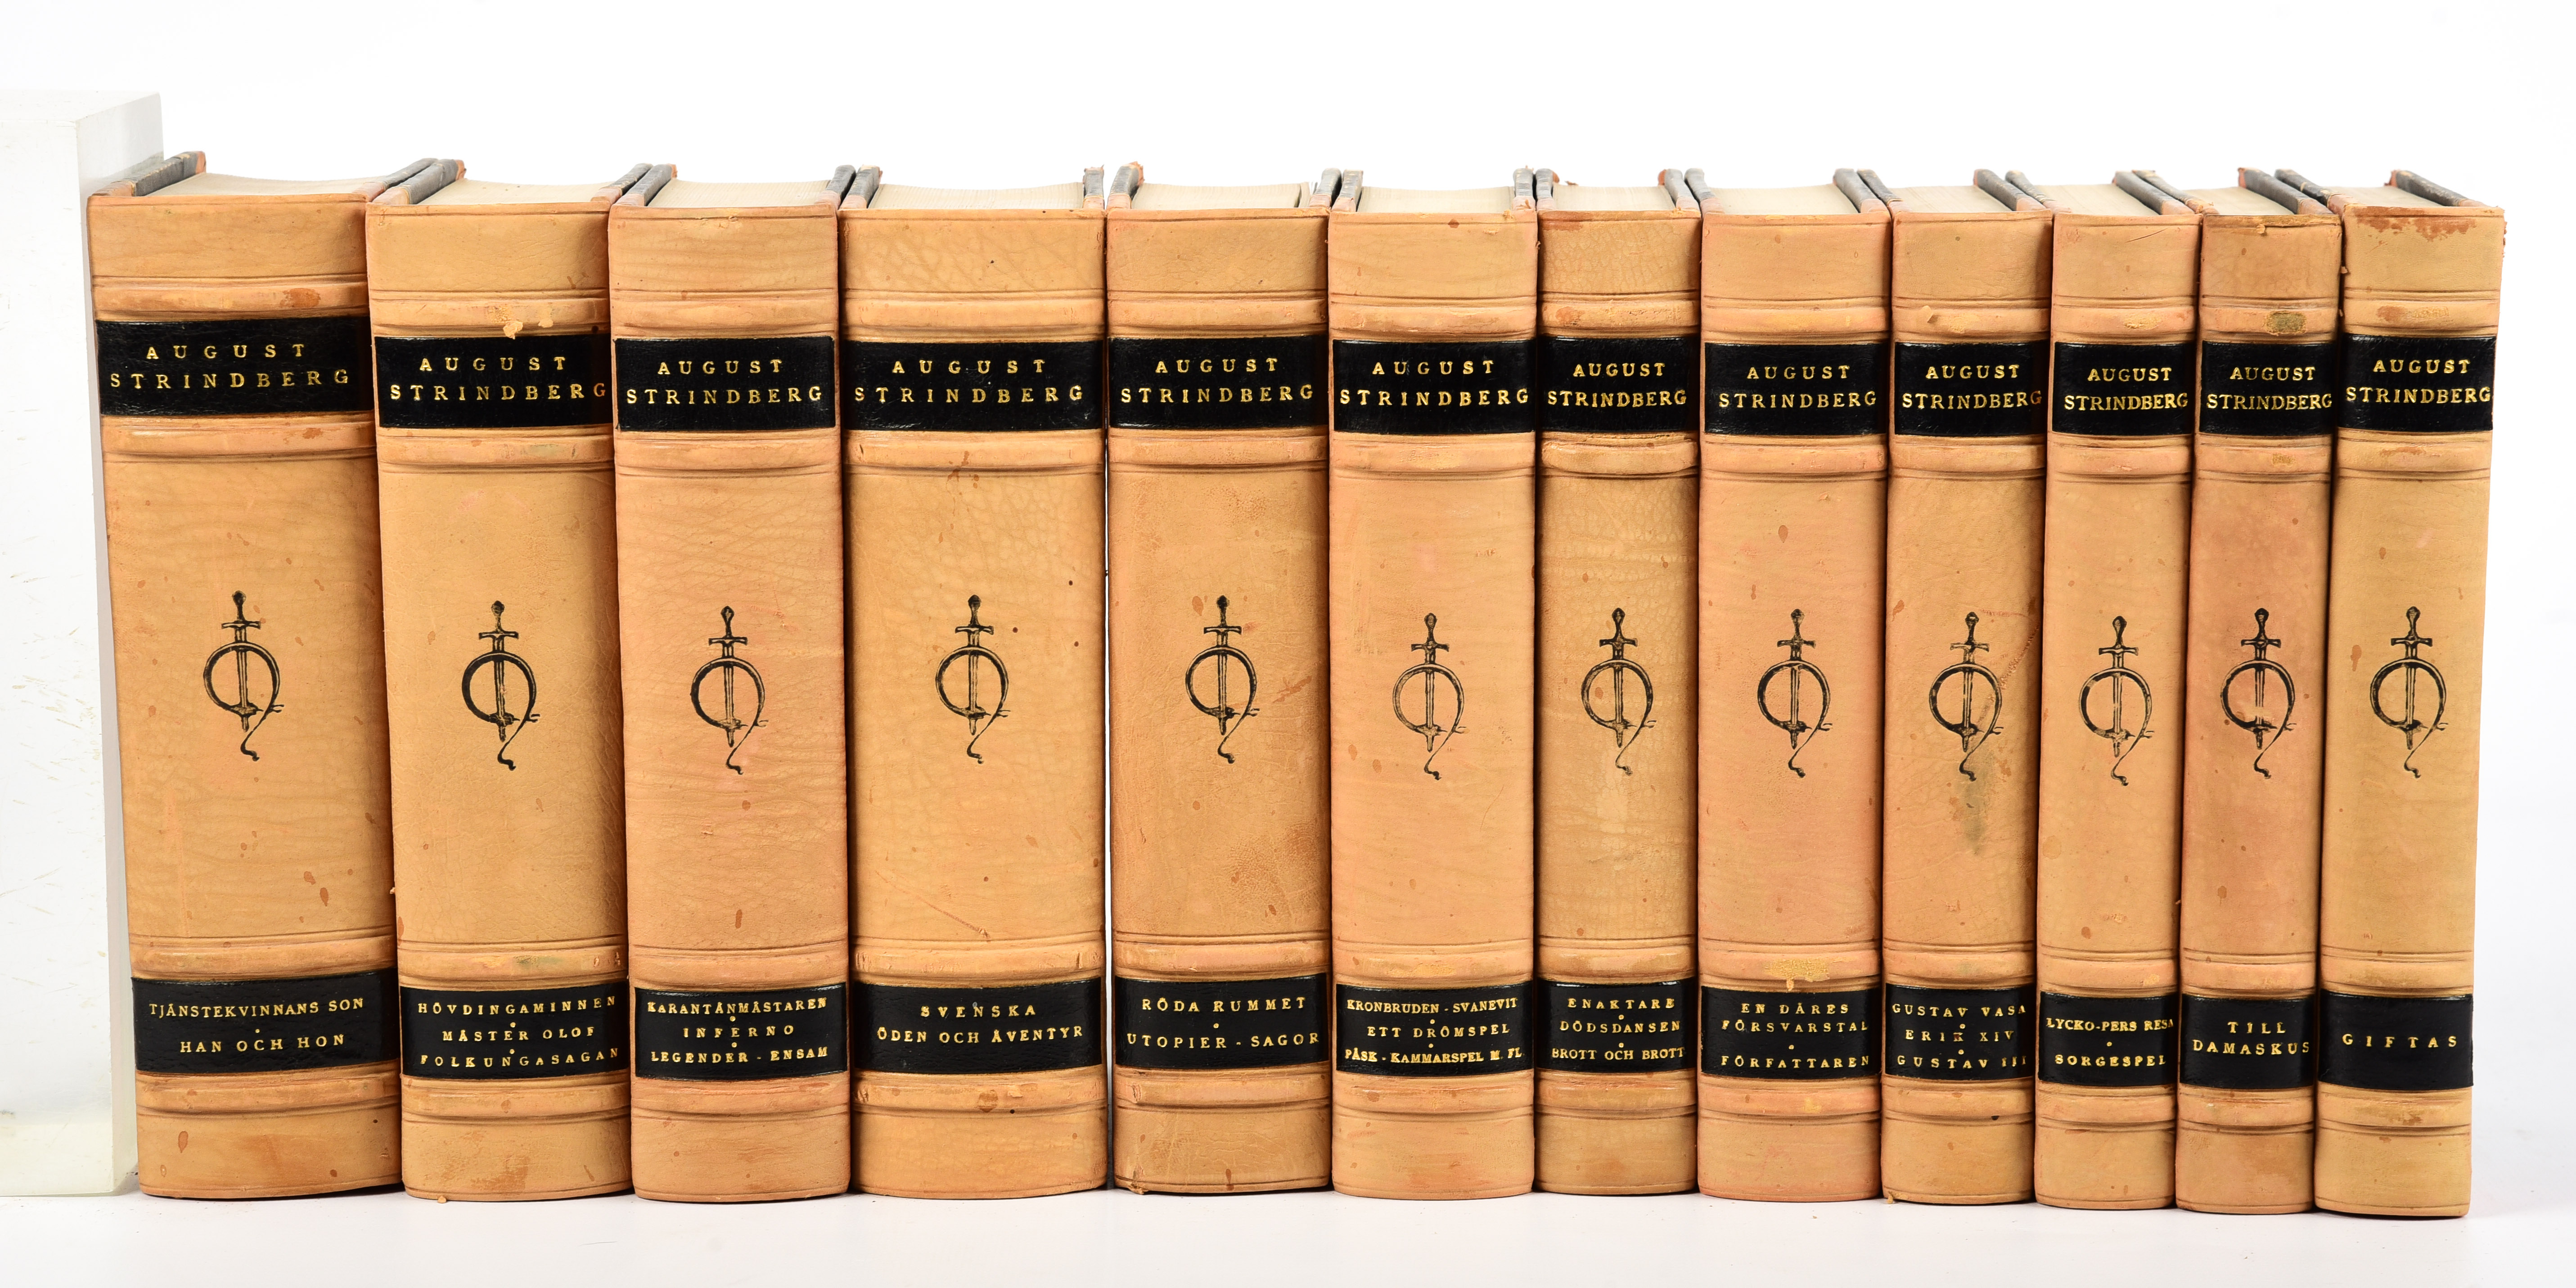 A 12-volume set in Swedish of the works